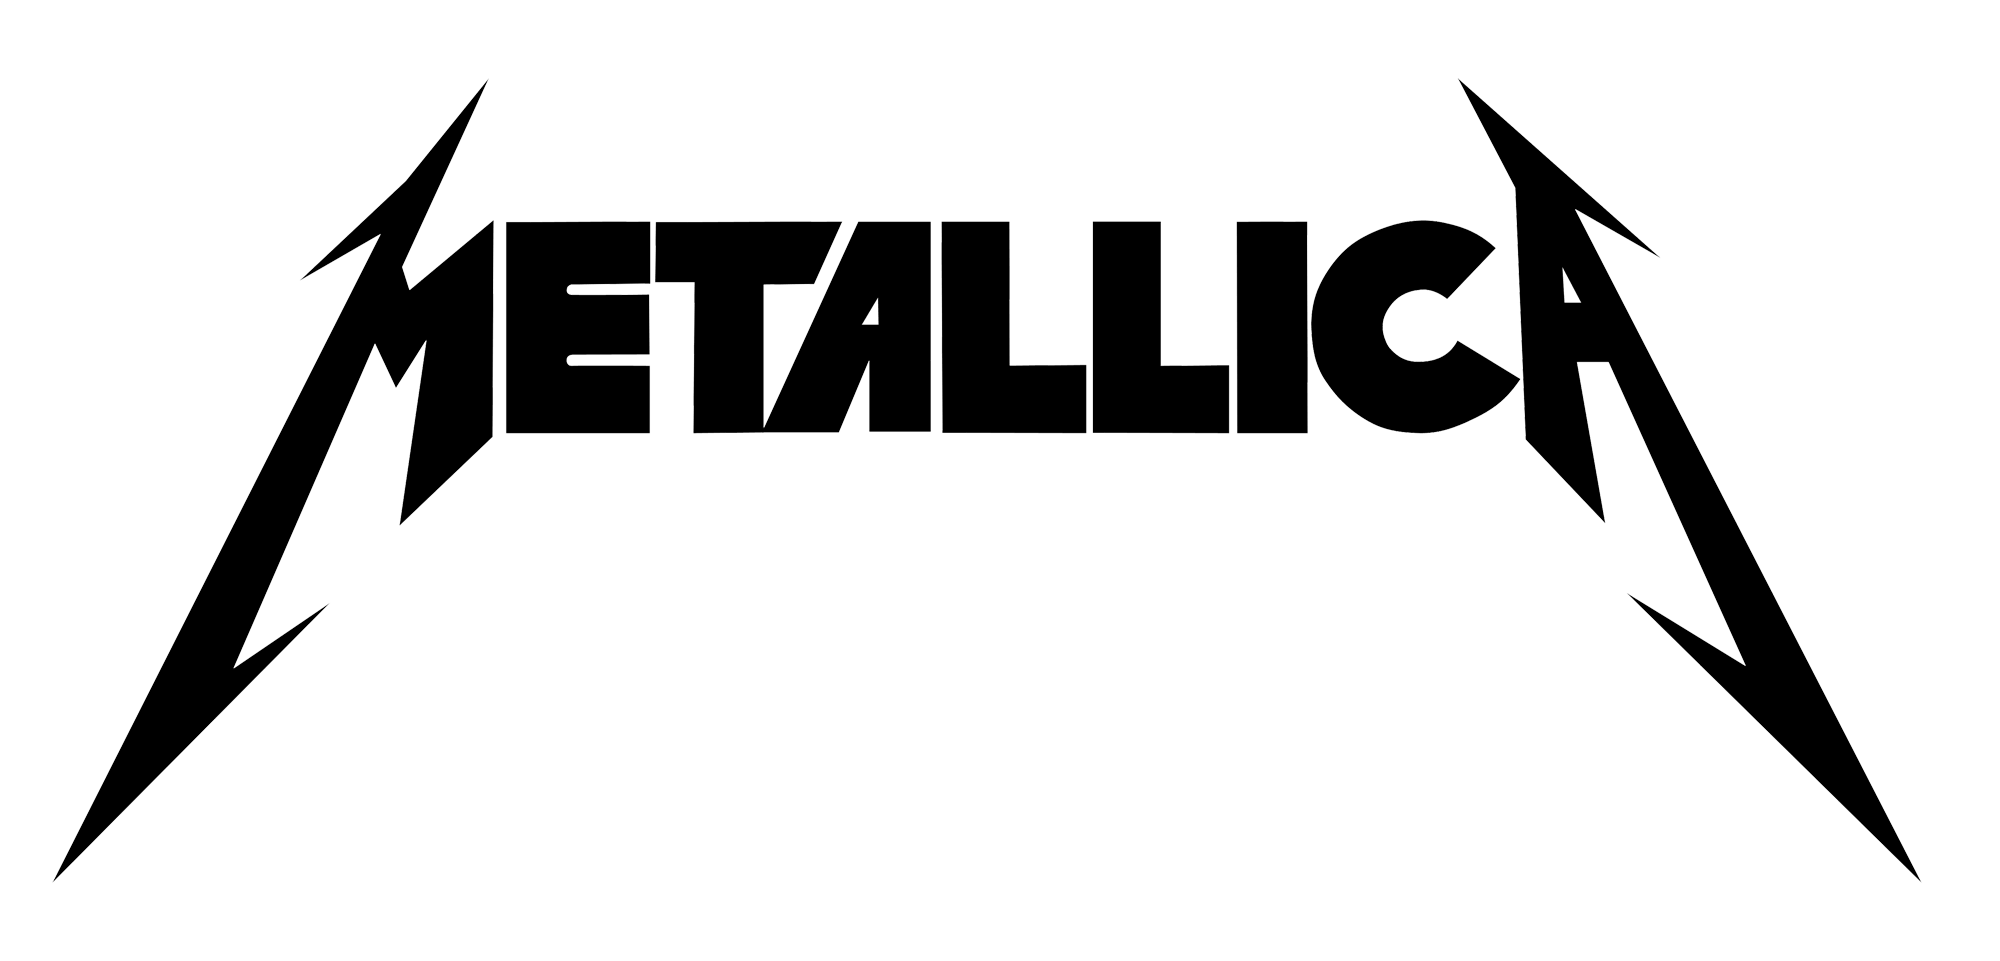 Meticalla Logo - Meaning Metallica logo and symbol | history and evolution